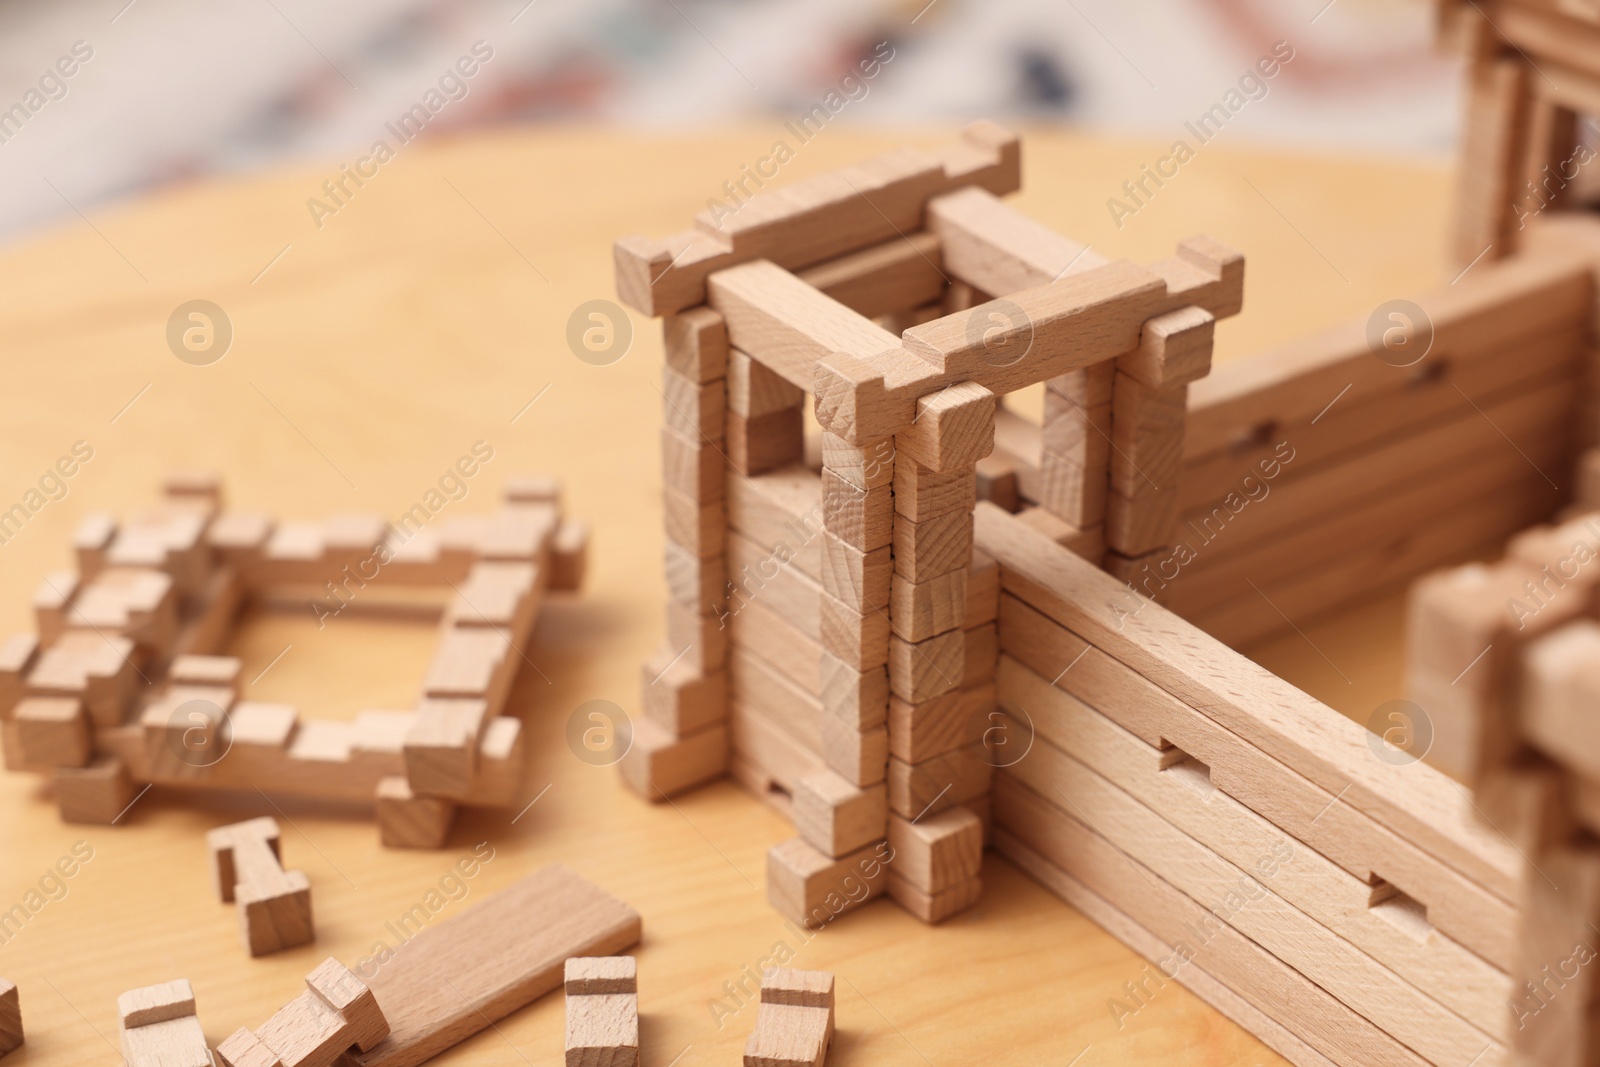 Photo of Wooden fortress and building blocks on table, closeup. Children's toy